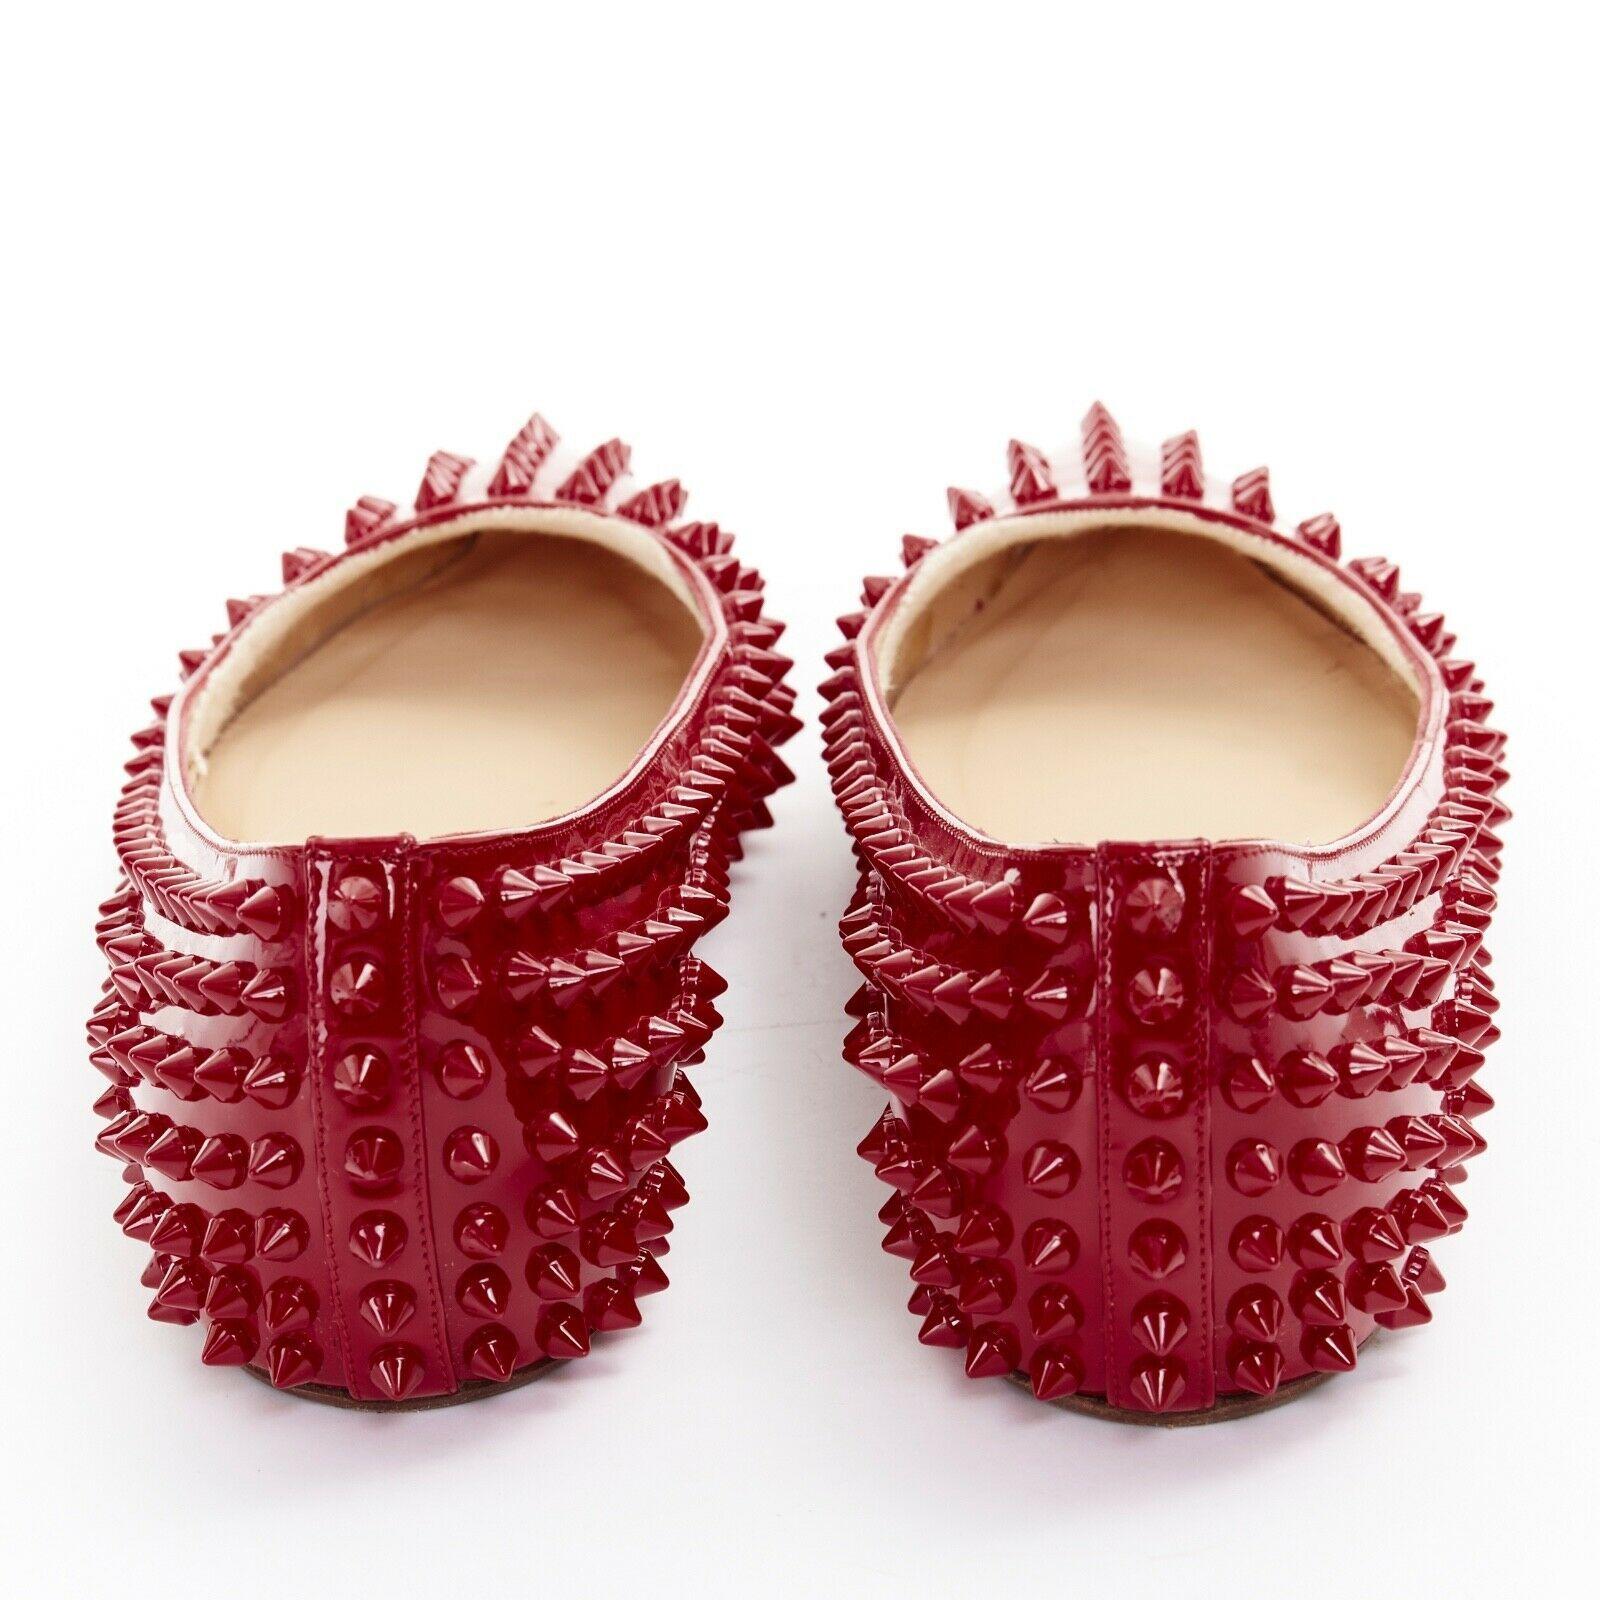 Red CHRISTIAN LOUBOUTIN Pigalle Spikes red patent studded pointy flats EU38.5